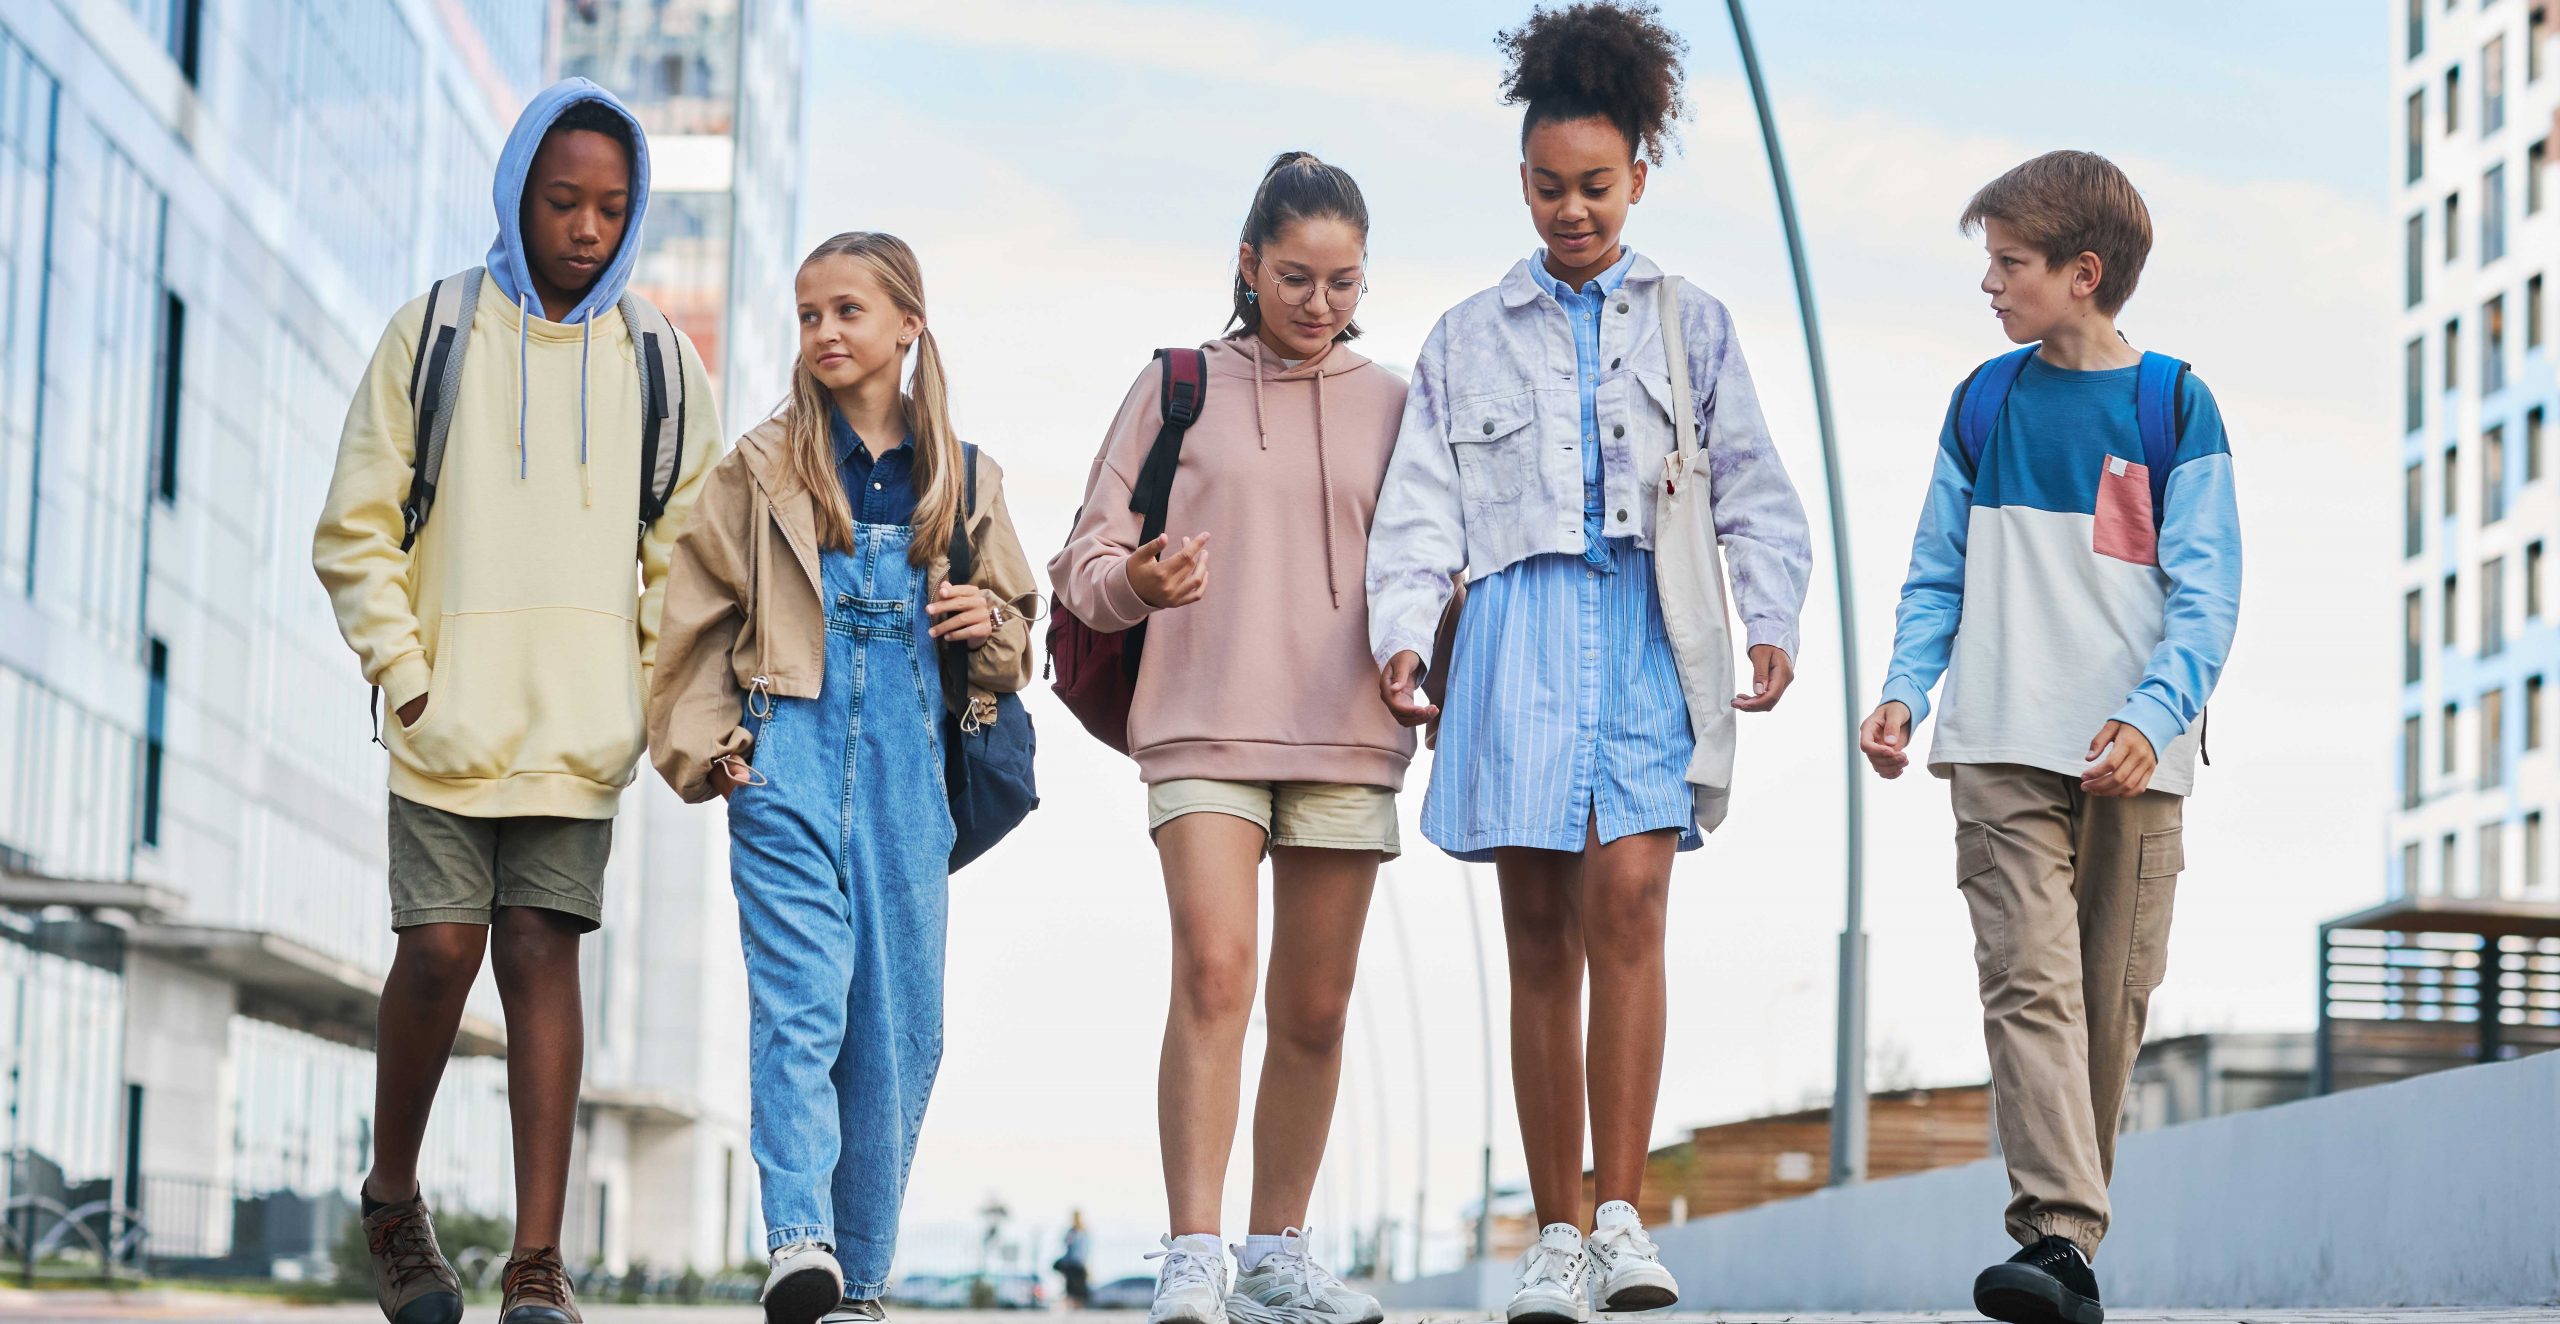 Group of five young teenagers walking side by side